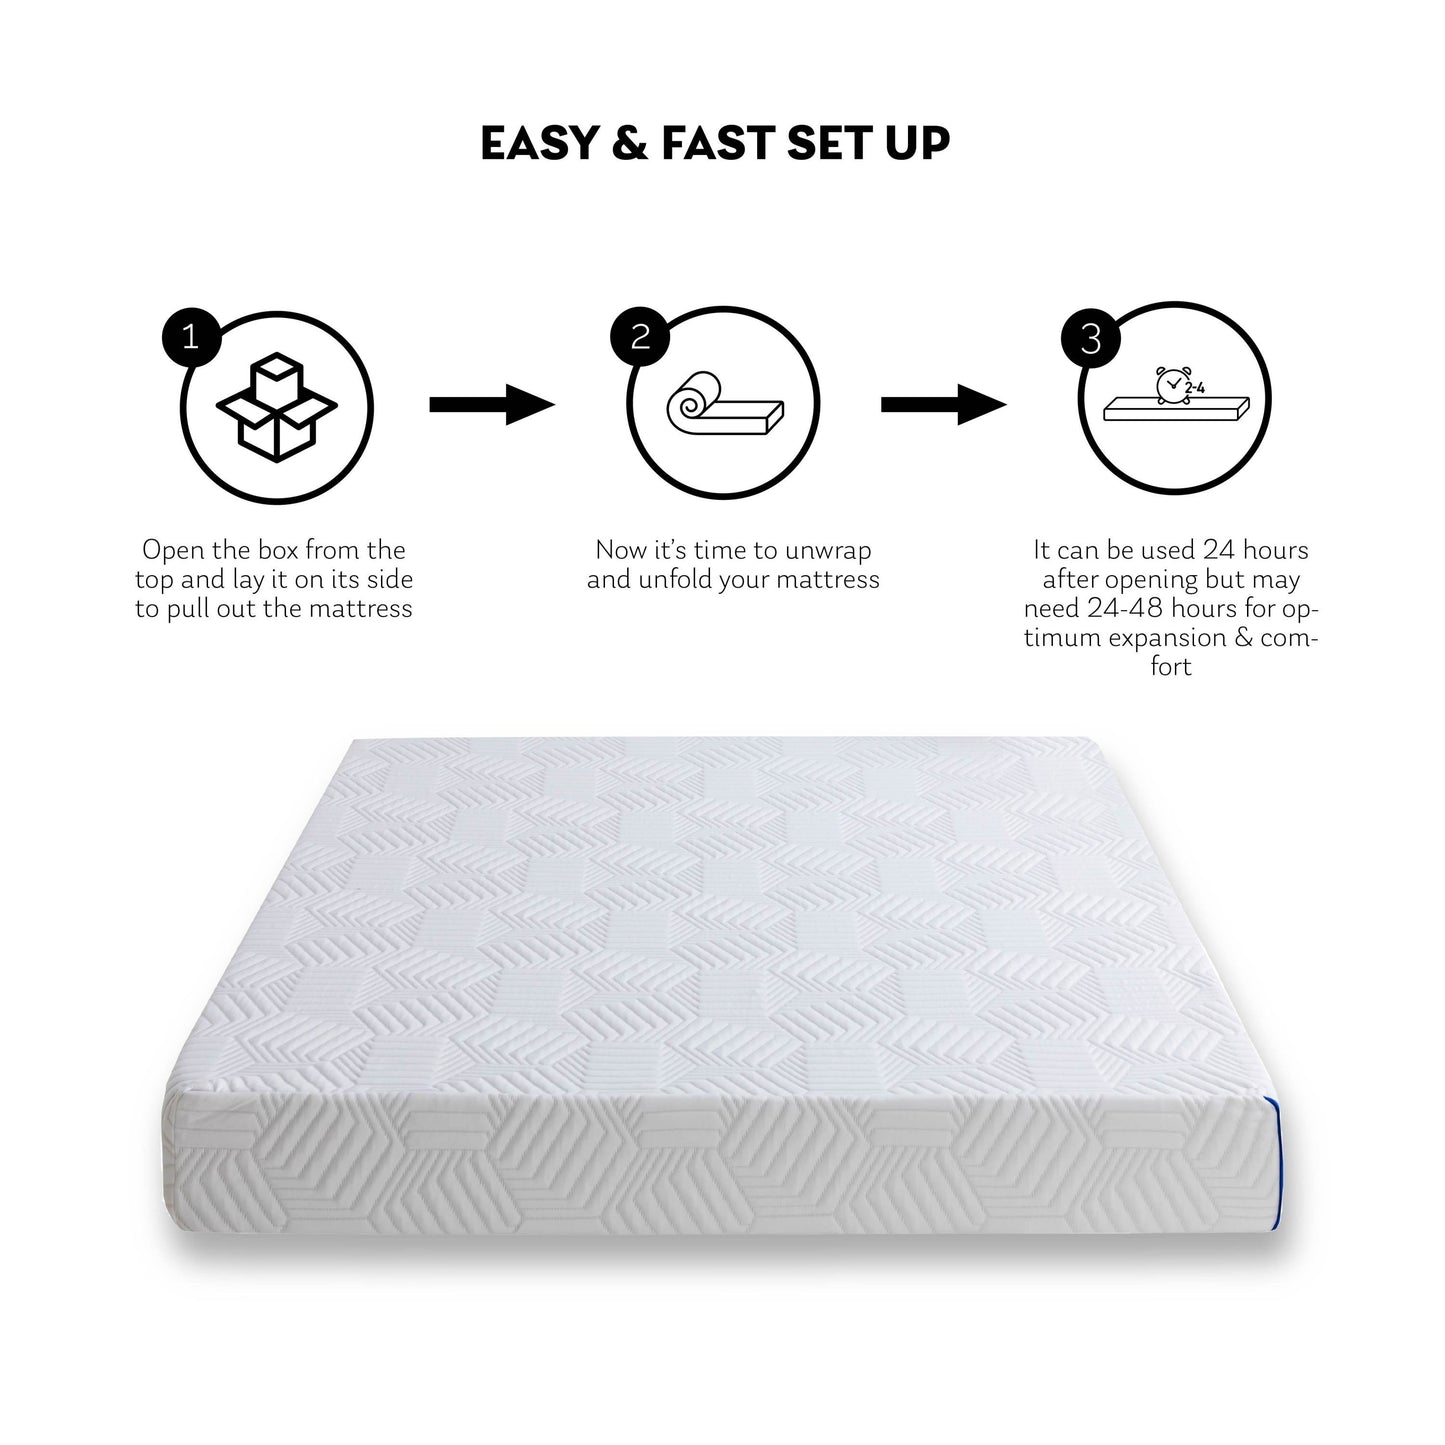 12 Inch King Gel Memory Foam Mattress, White, Bed in a Box, Green Tea and Cooling Gel Infused, CertiPUR-US Certified